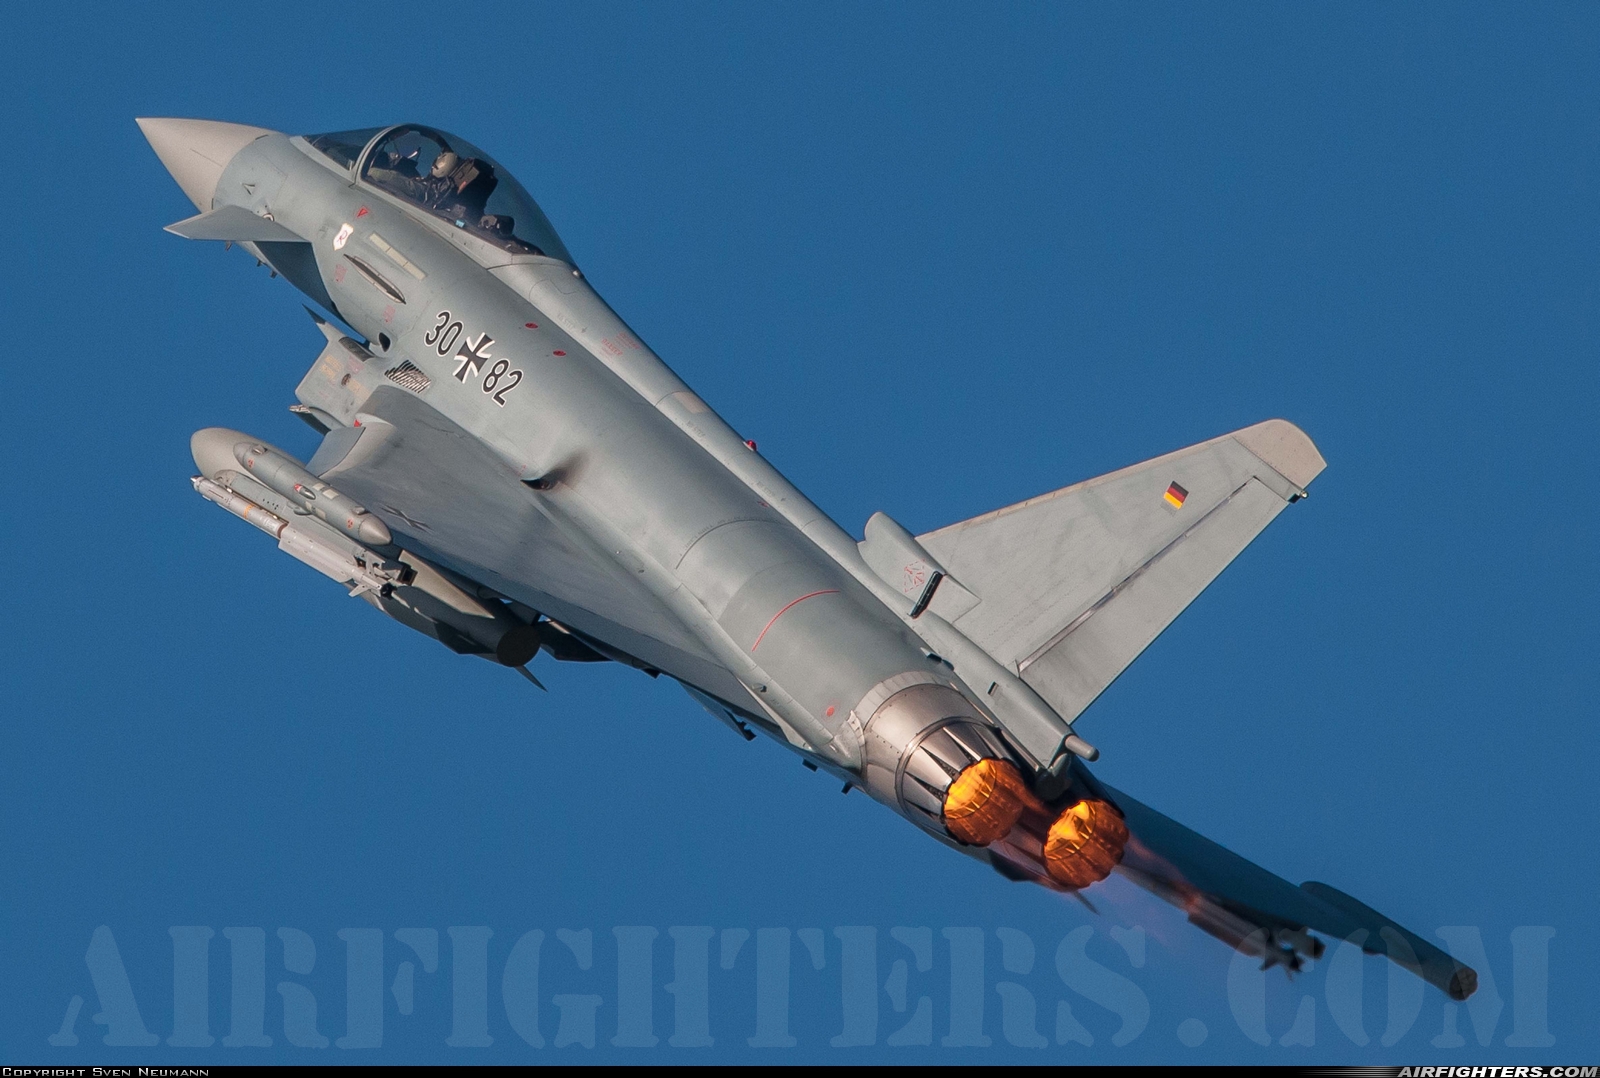 Germany - Air Force Eurofighter EF-2000 Typhoon S 30+82 at Wittmundhafen (Wittmund) (ETNT), Germany